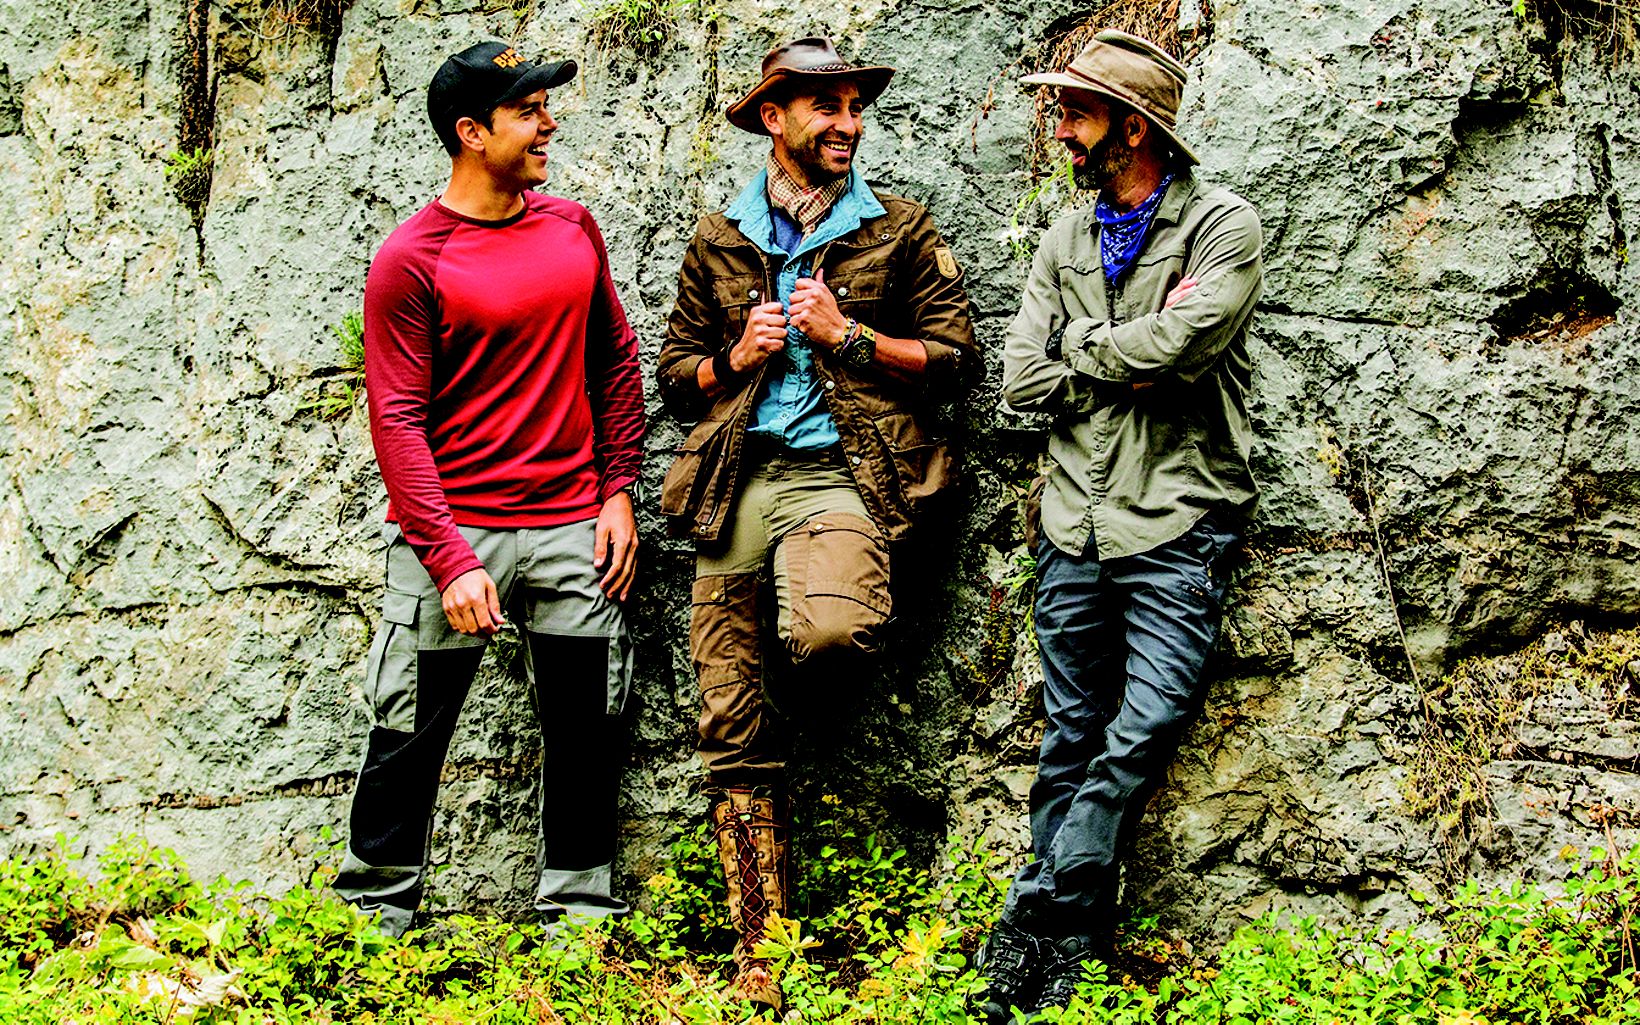 Brave Wilderness Hosts Mark Vins, Coyote Peterson and Mario Aldecoa plan to explore the creatures and critters that make their homes in The Nature Conservancy preserves.  © Wilderness Productions, LLC